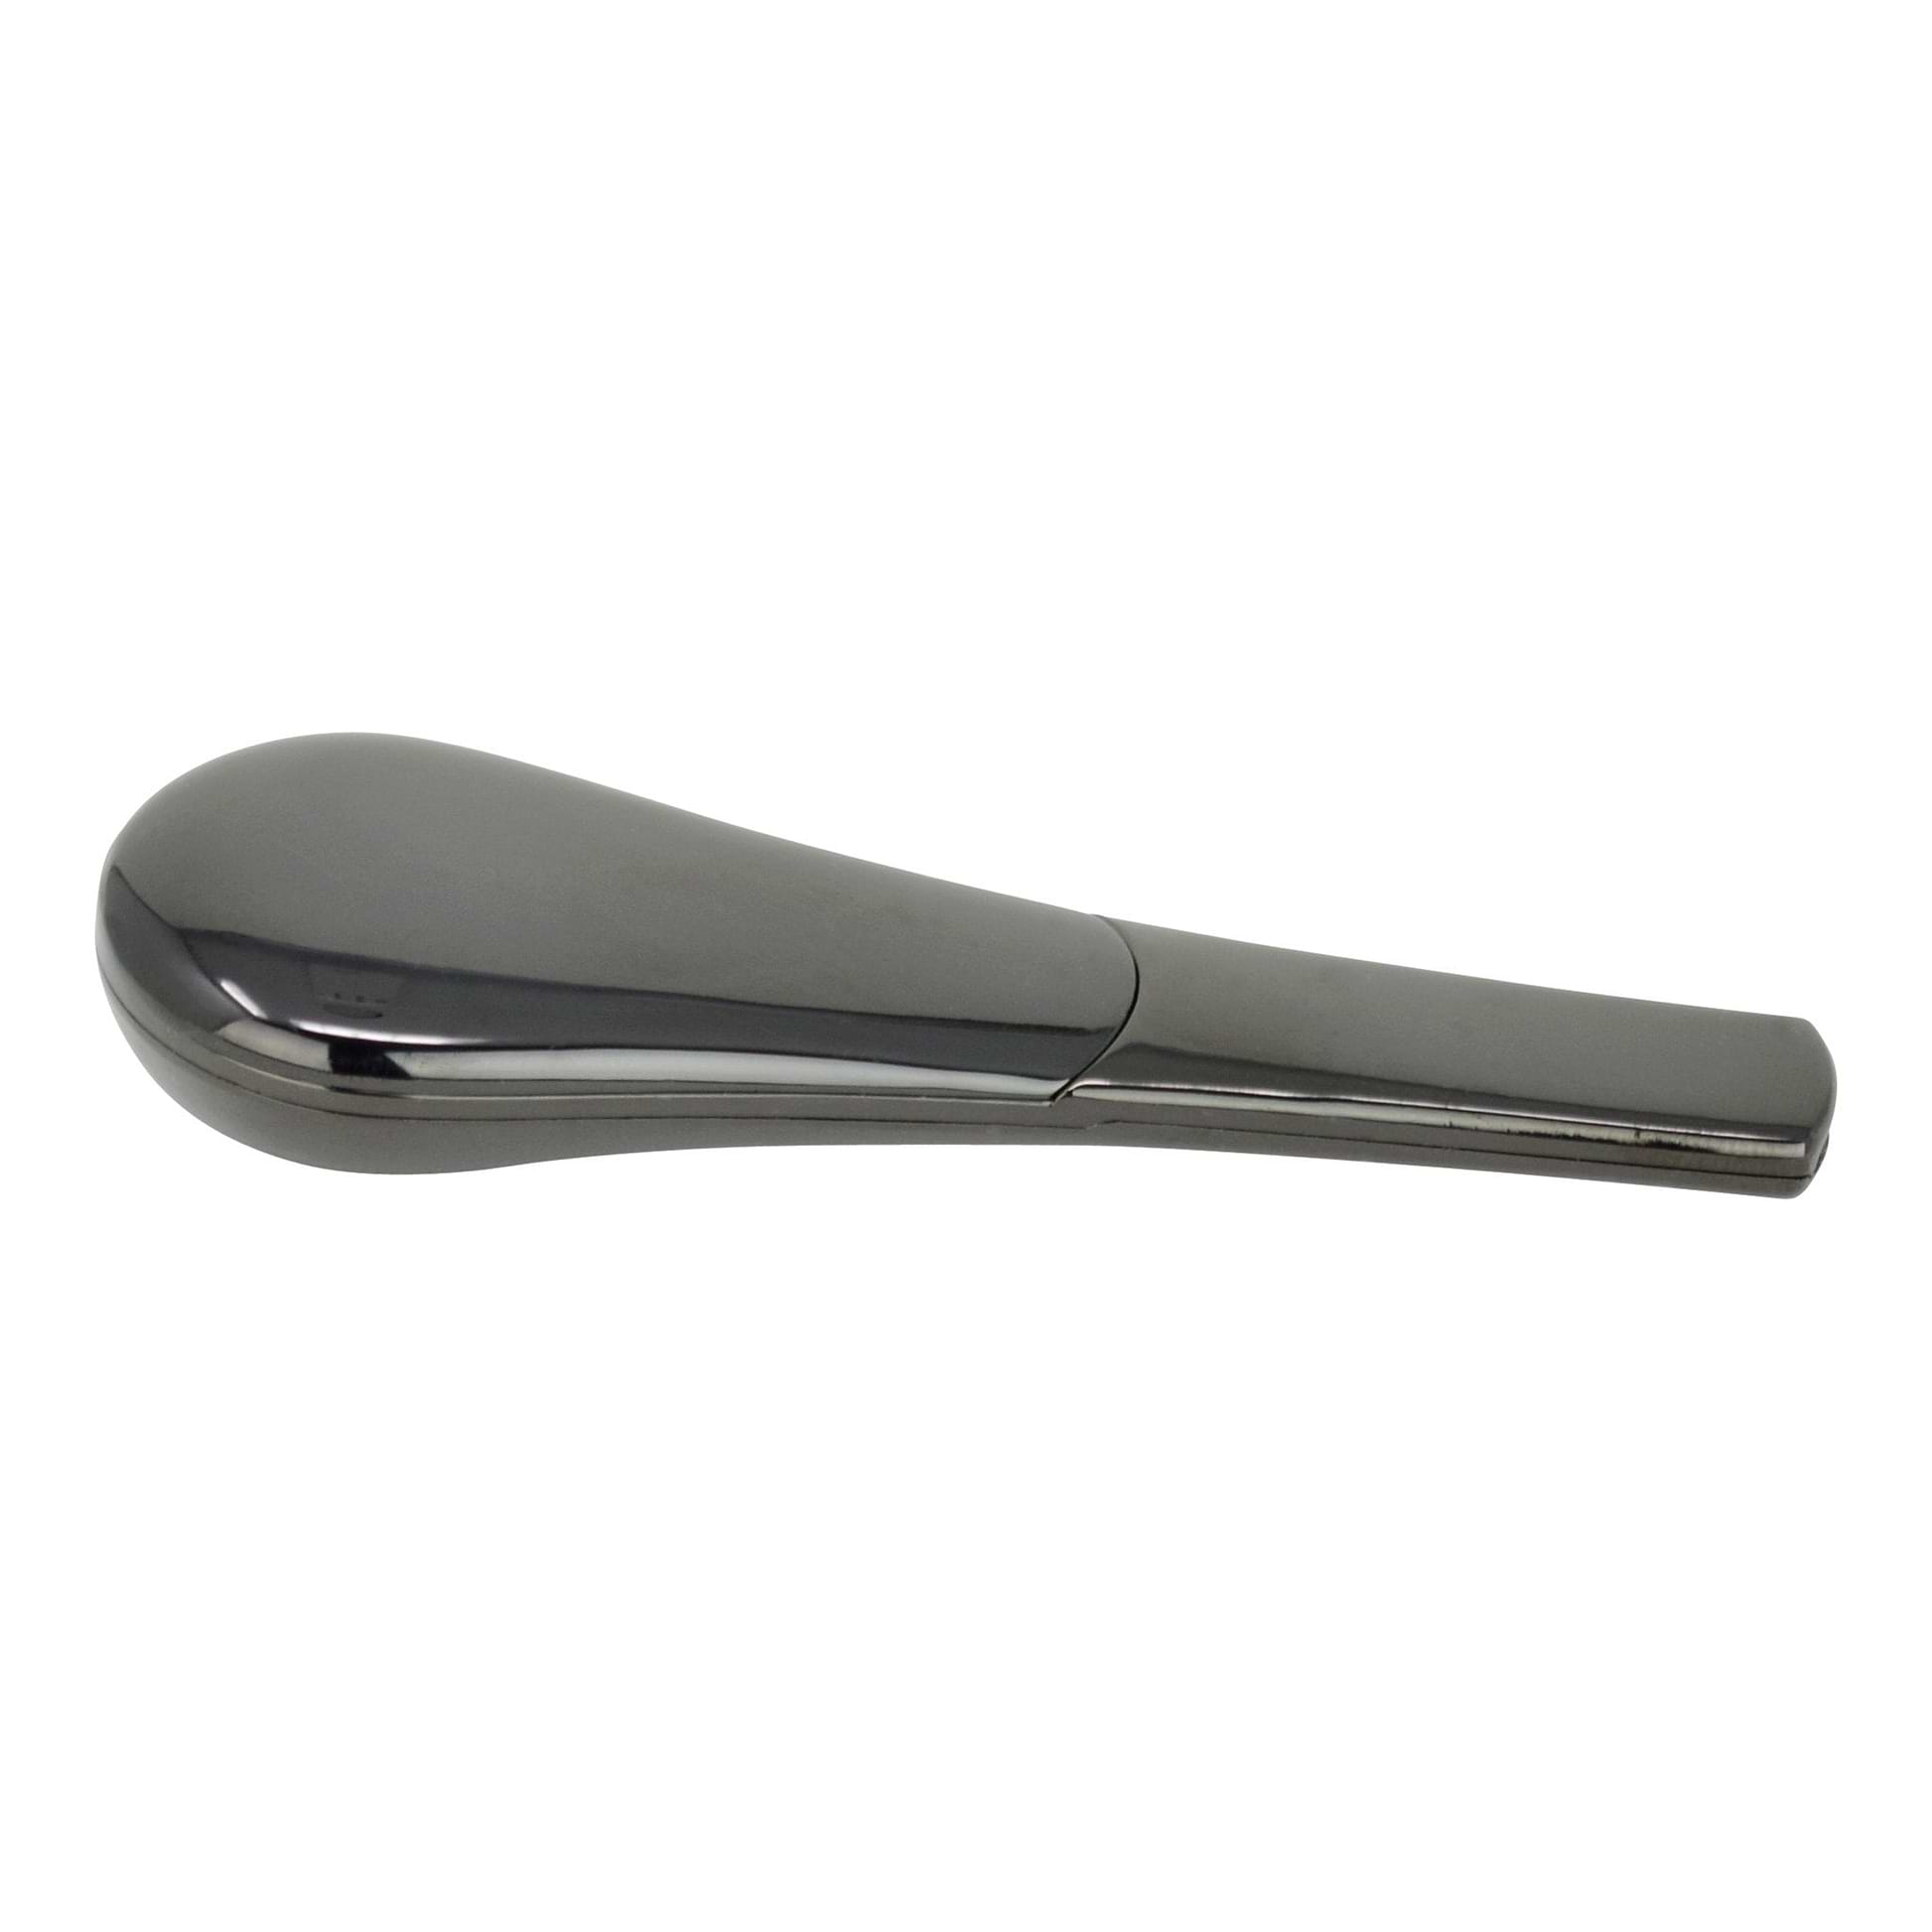 3.5 inch magnetic travel hand pipe in a discreet spoon shape in stylish metallic black in an elegant case